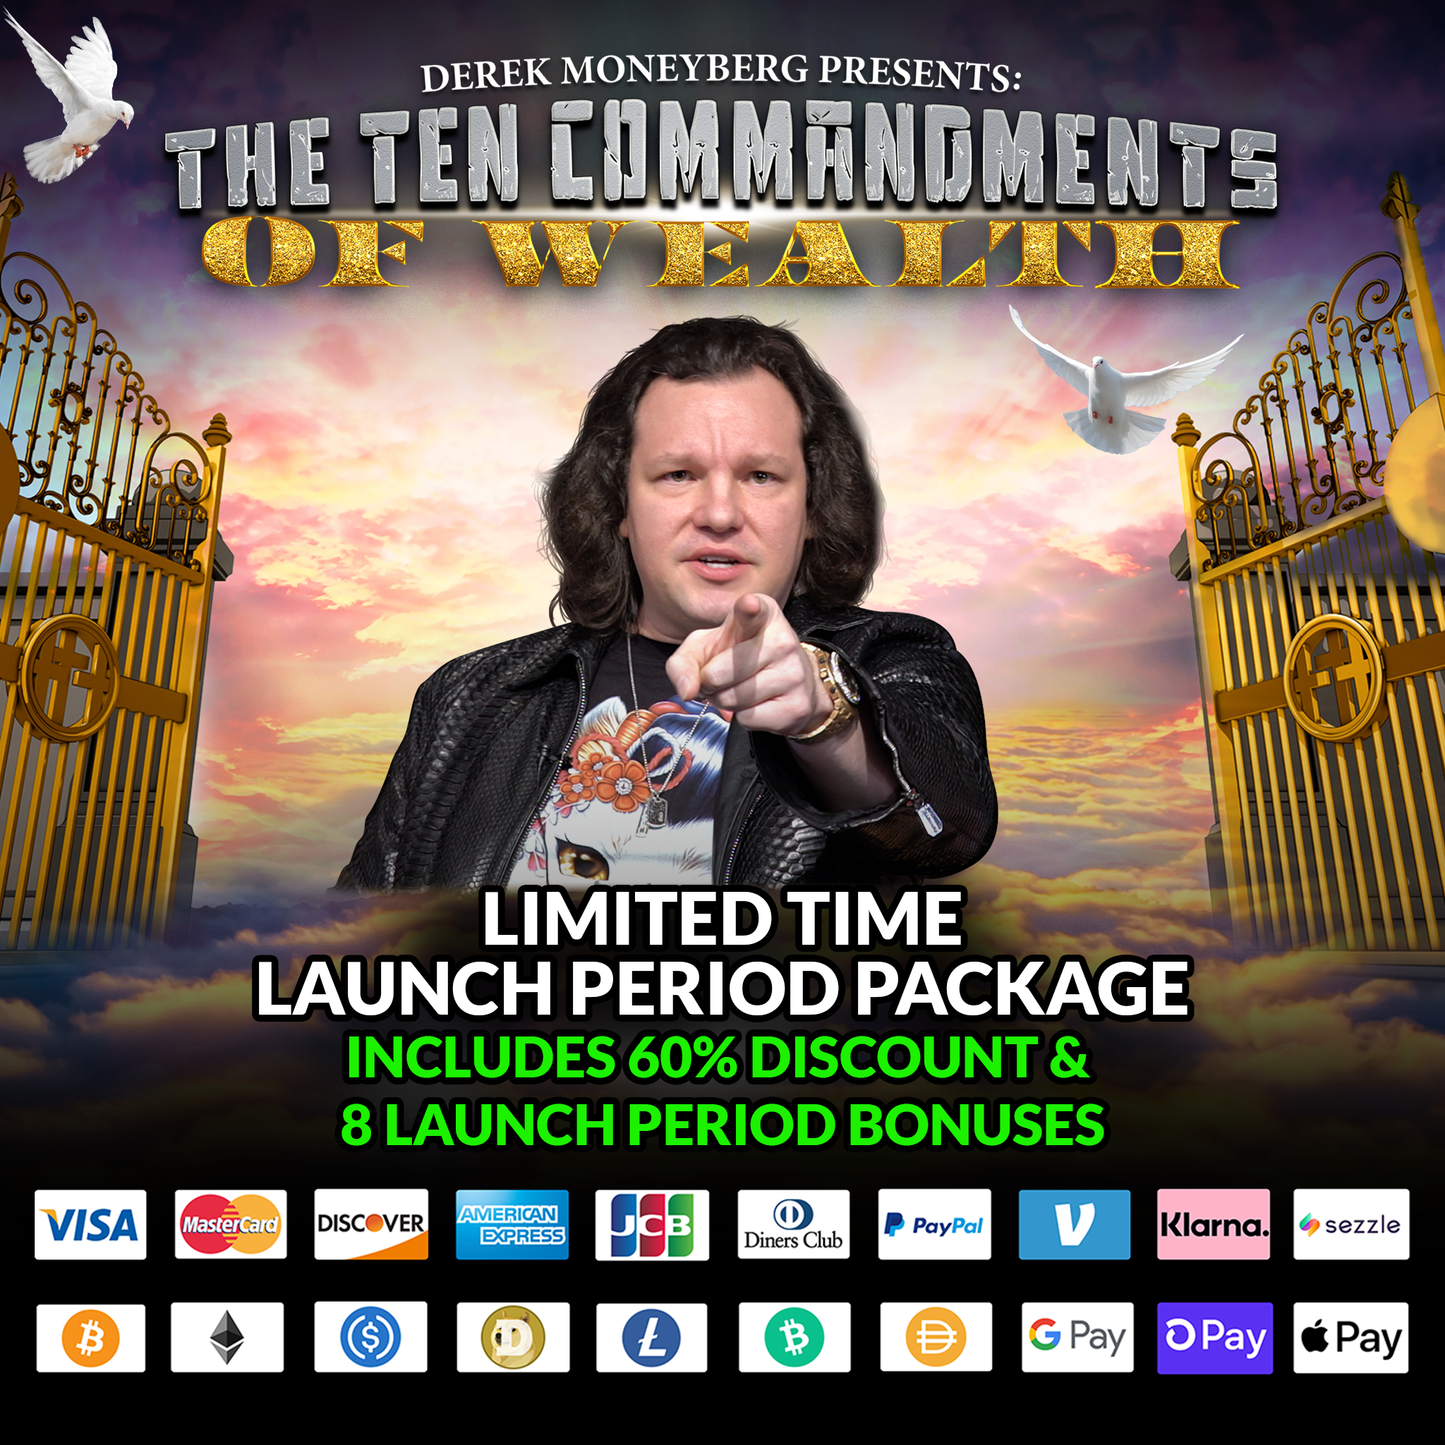 Derek Moneyberg Presents: The Ten Commandments of Wealth (Limited-Time Launch Period Package)